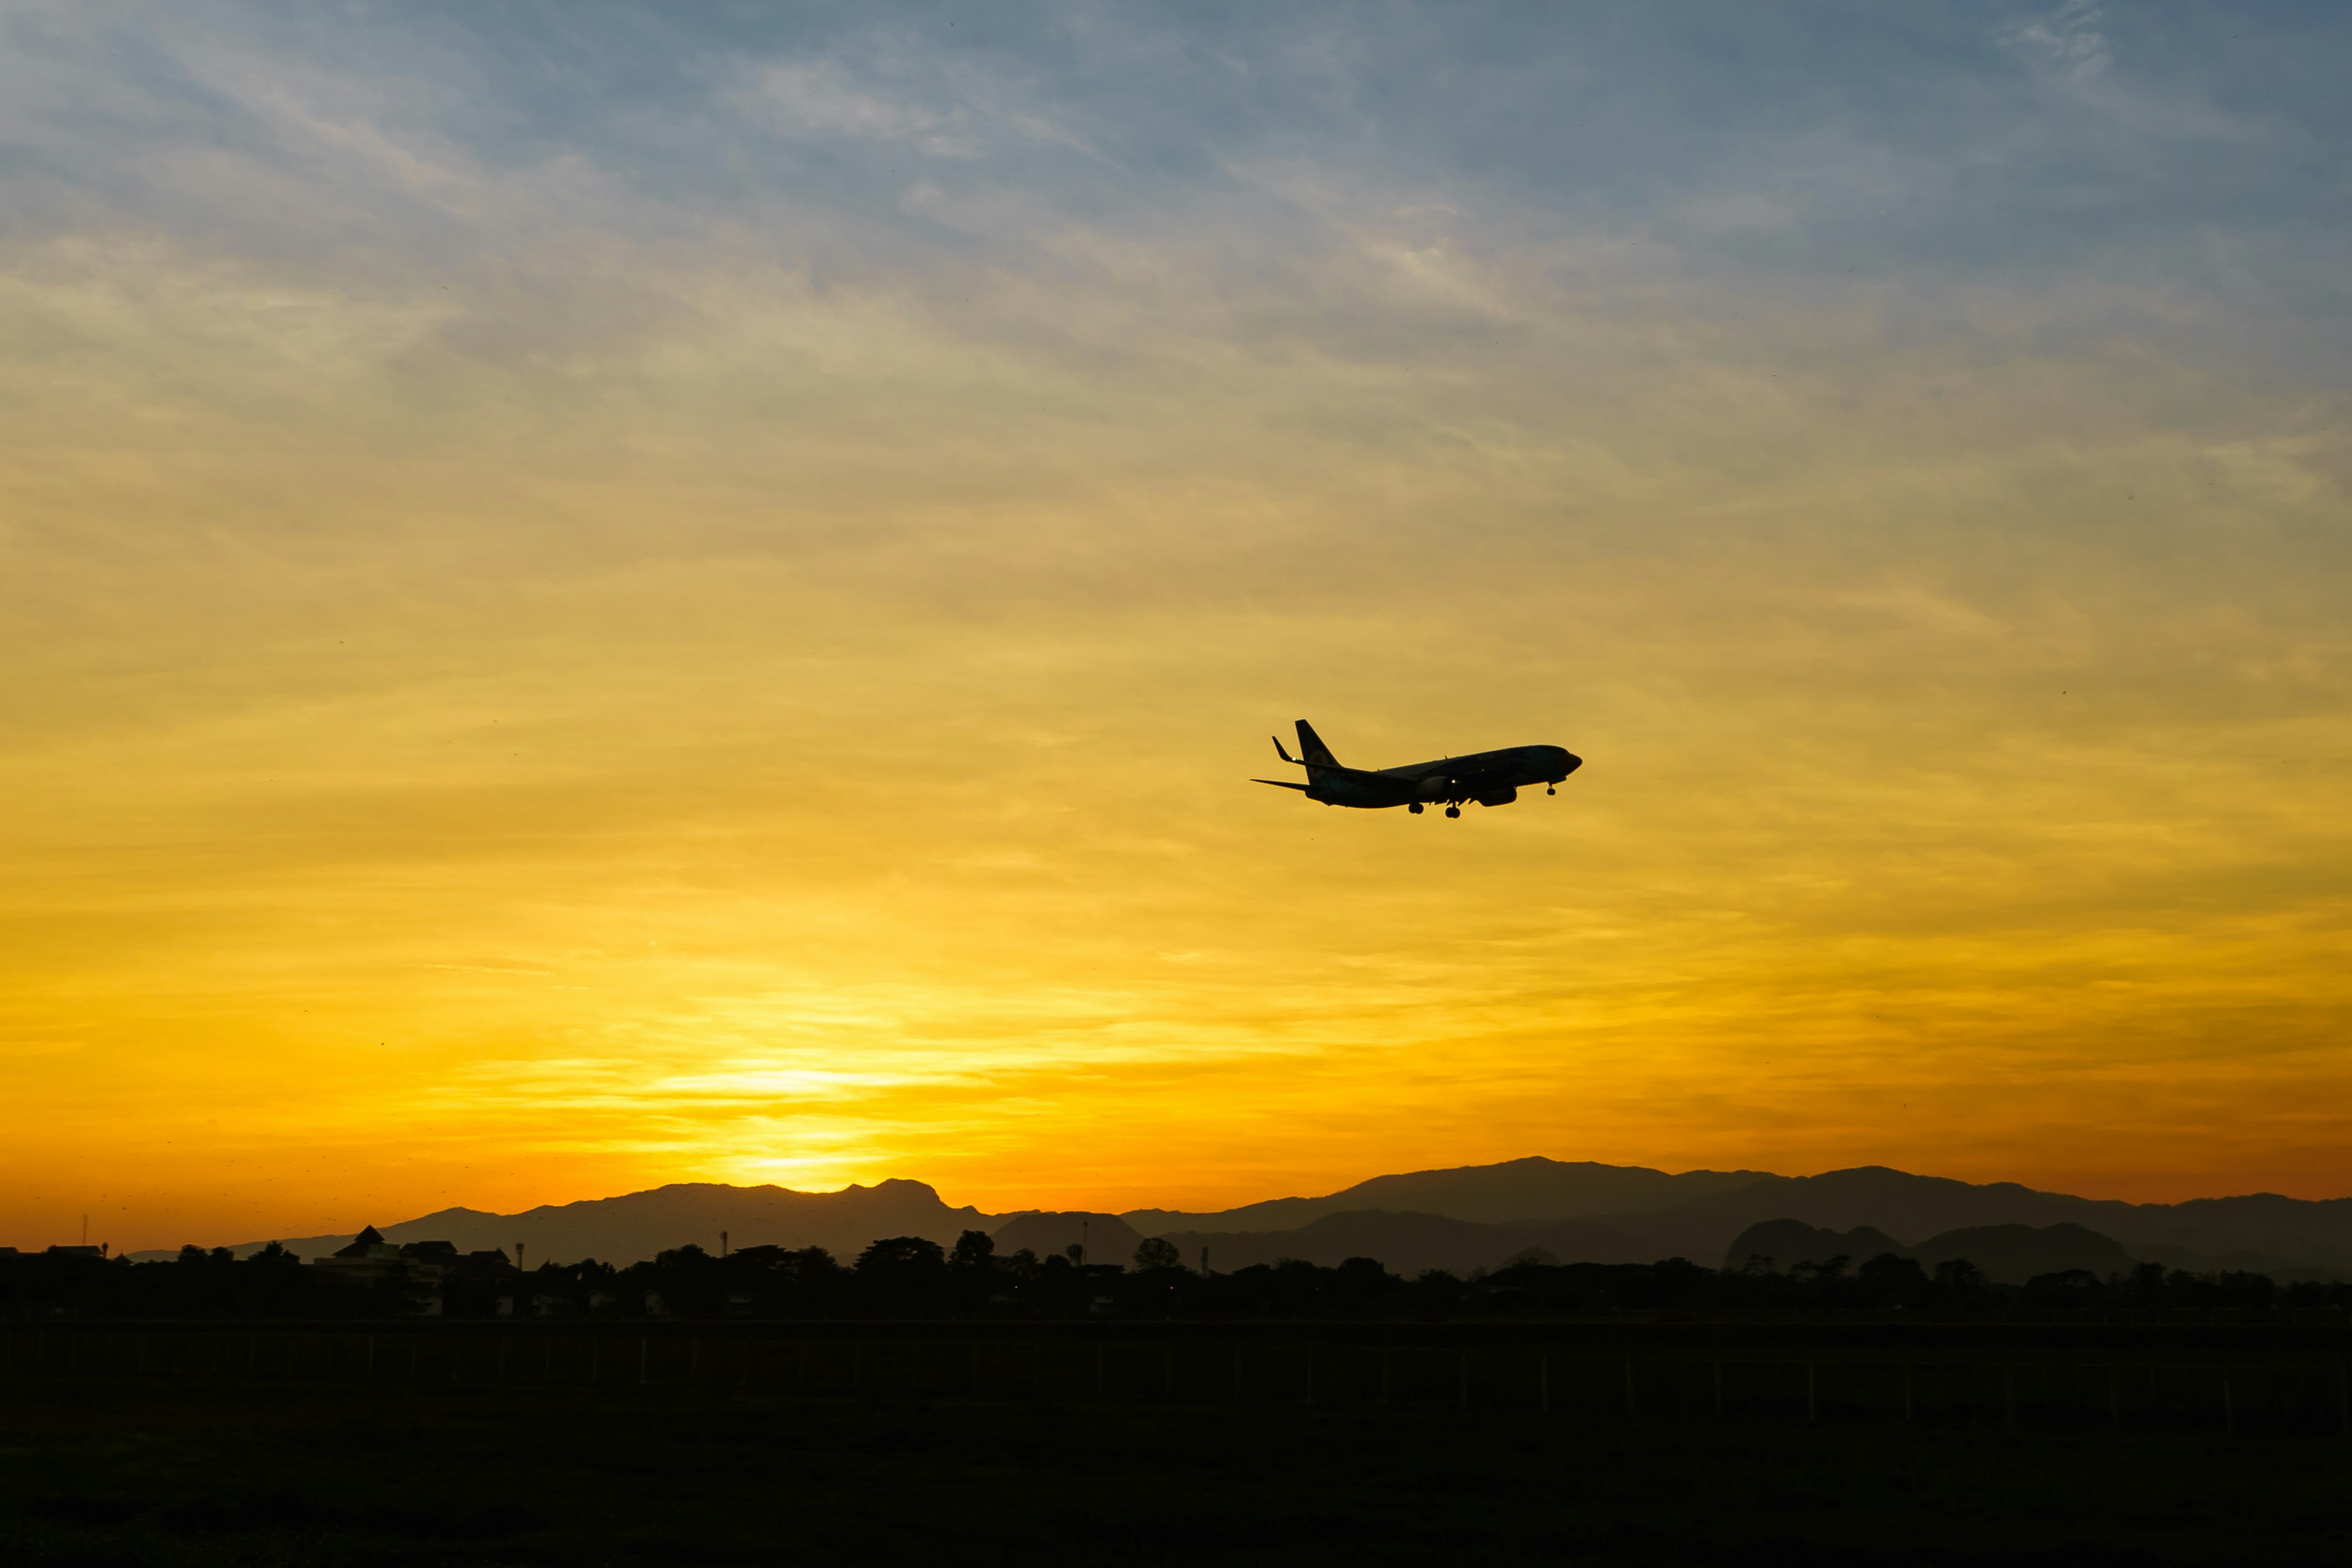 A silhouette of a plane against a bright orange sunset